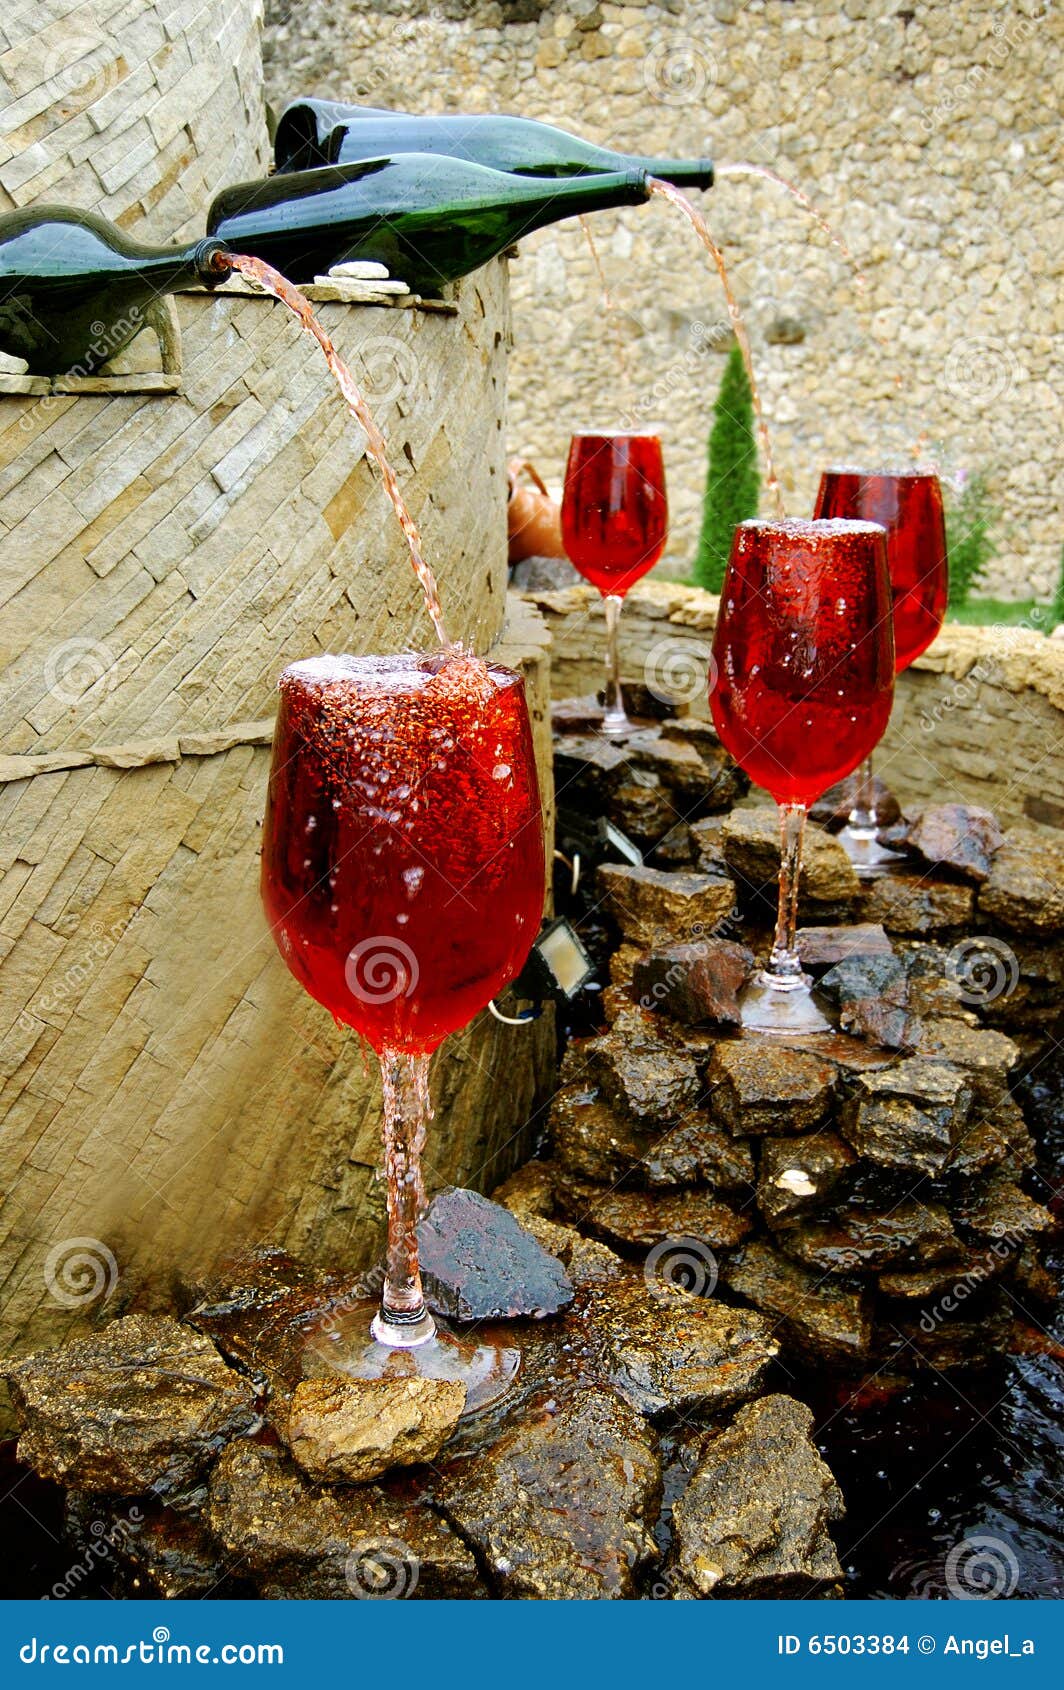 https://thumbs.dreamstime.com/z/red-wine-fountain-6503384.jpg